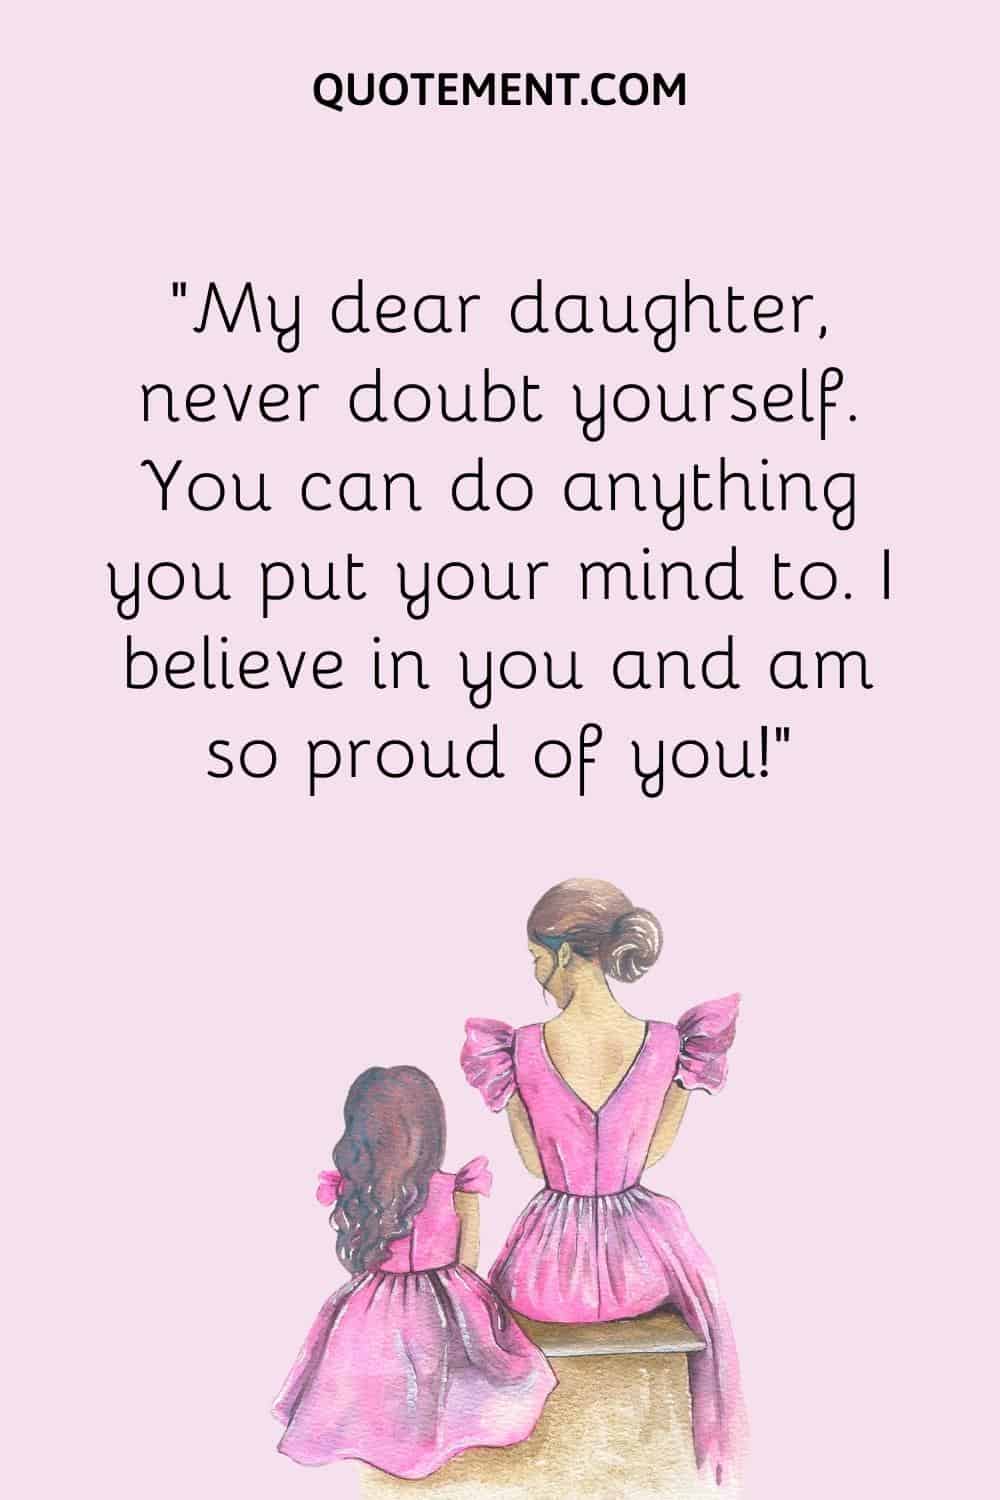 . “My dear daughter, never doubt yourself. You can do anything you put your mind to. I believe in you and am so proud of you!”